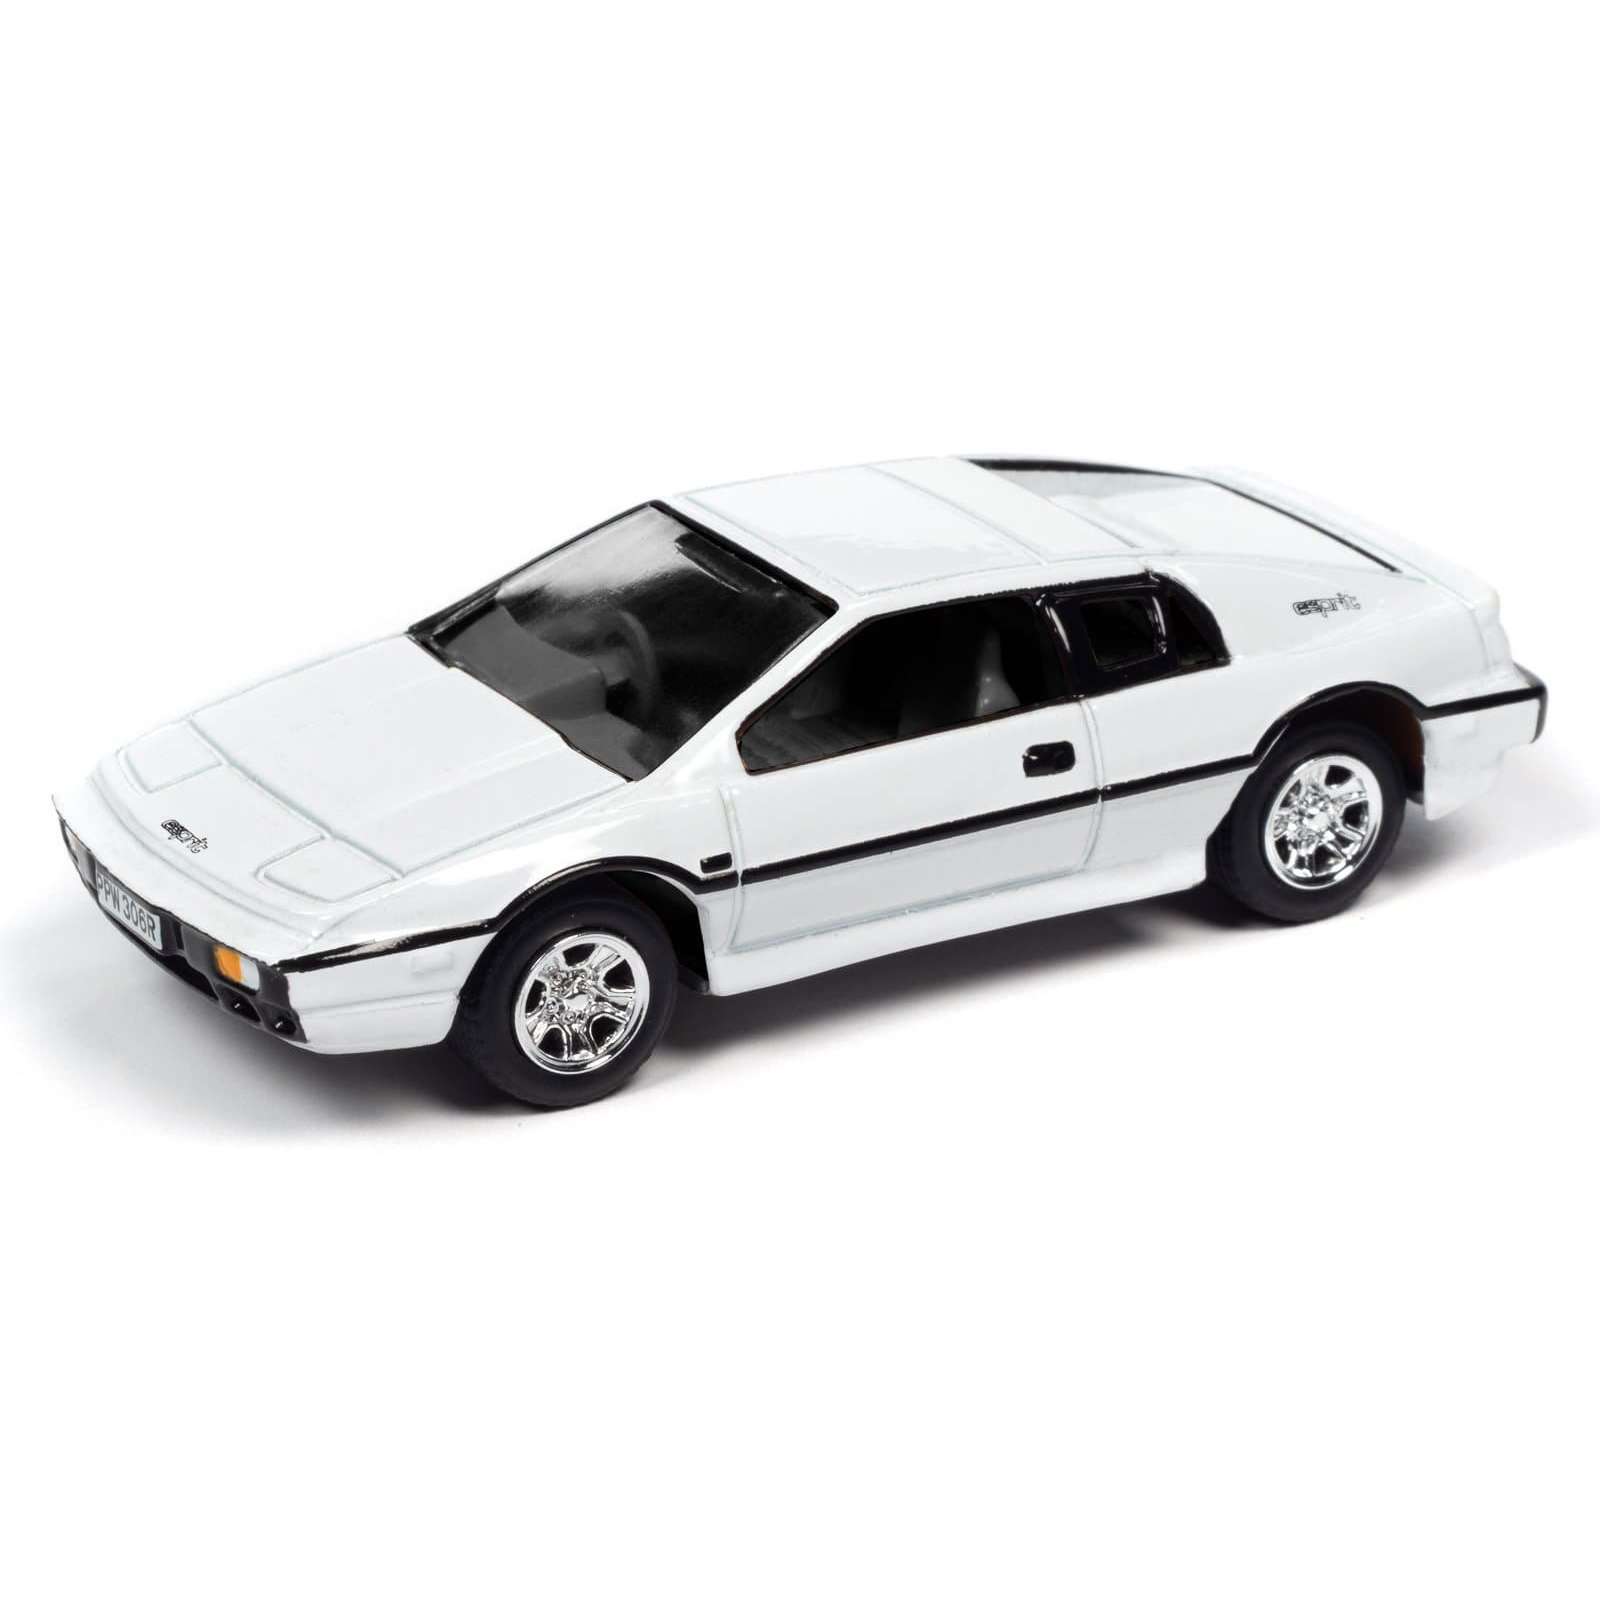 James Bond Lotus Esprit Model Car - The Spy Who Loved Me Edition - By Johnny Lightning ROUND2 